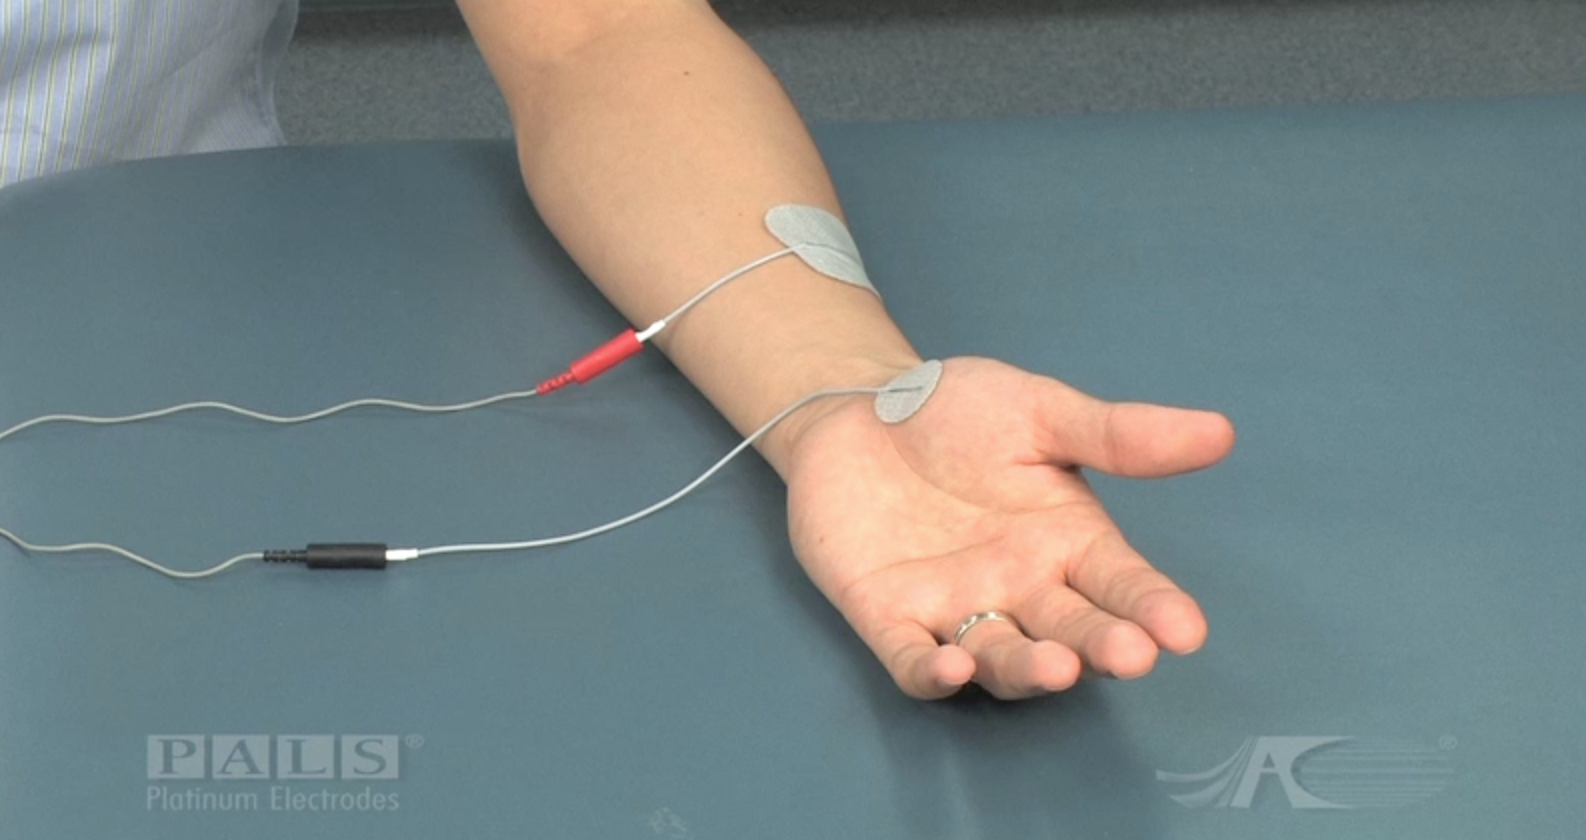 Neuromuscular electrical stimulation (NMES) electrode. a, NMES